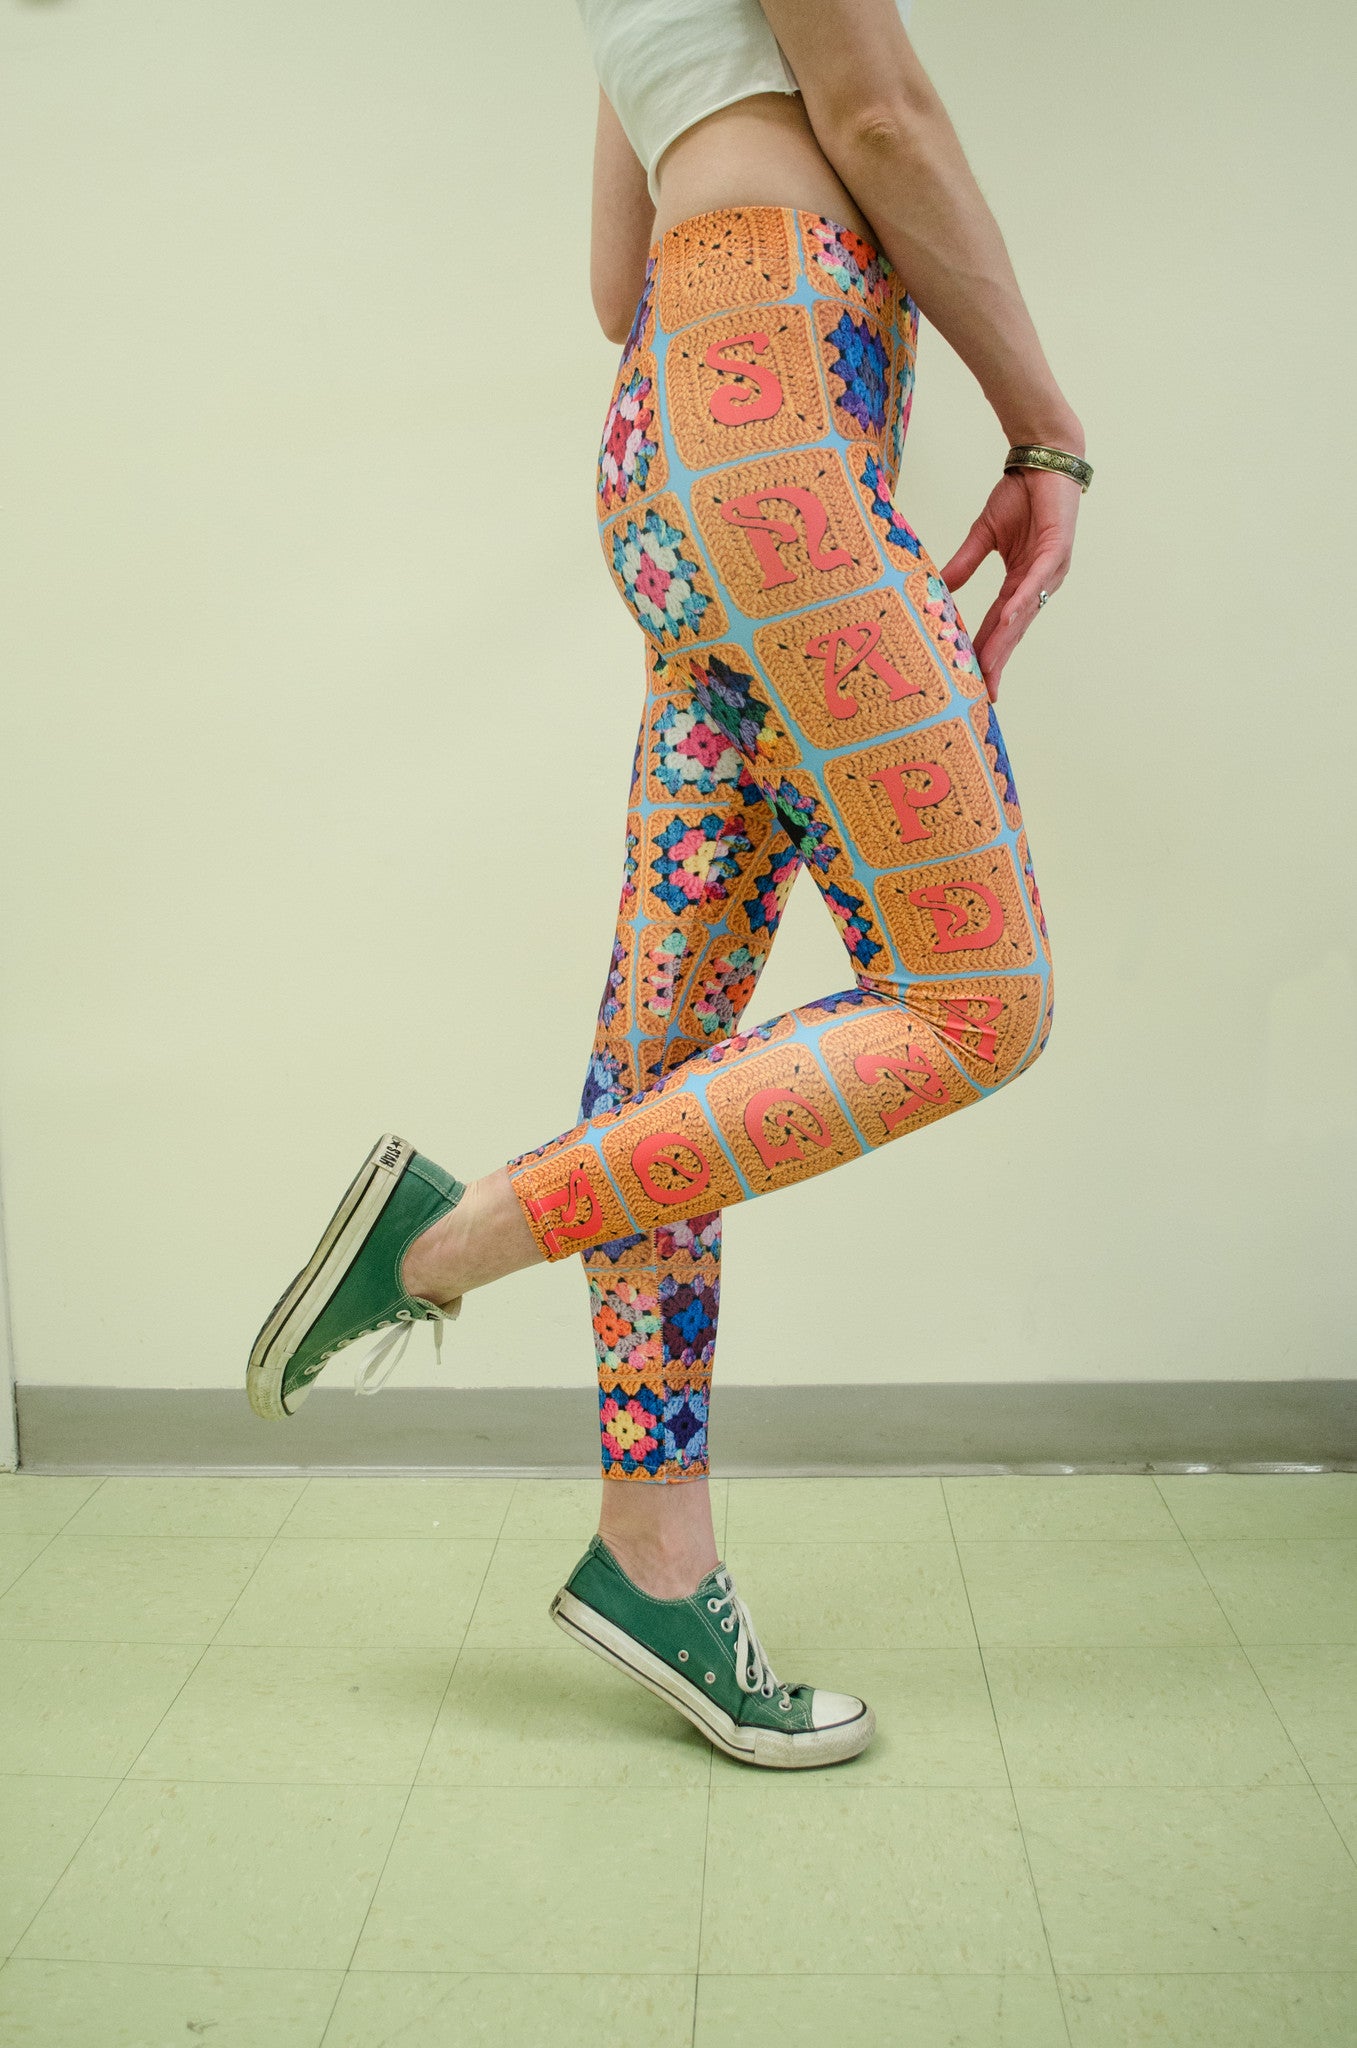 Snapdragon Brand Clothing Granny Square Crochet Print gold leggings in style Snappy features a 1970s vintage feel and a rainbow of colors. Made of comfortable spandex. 